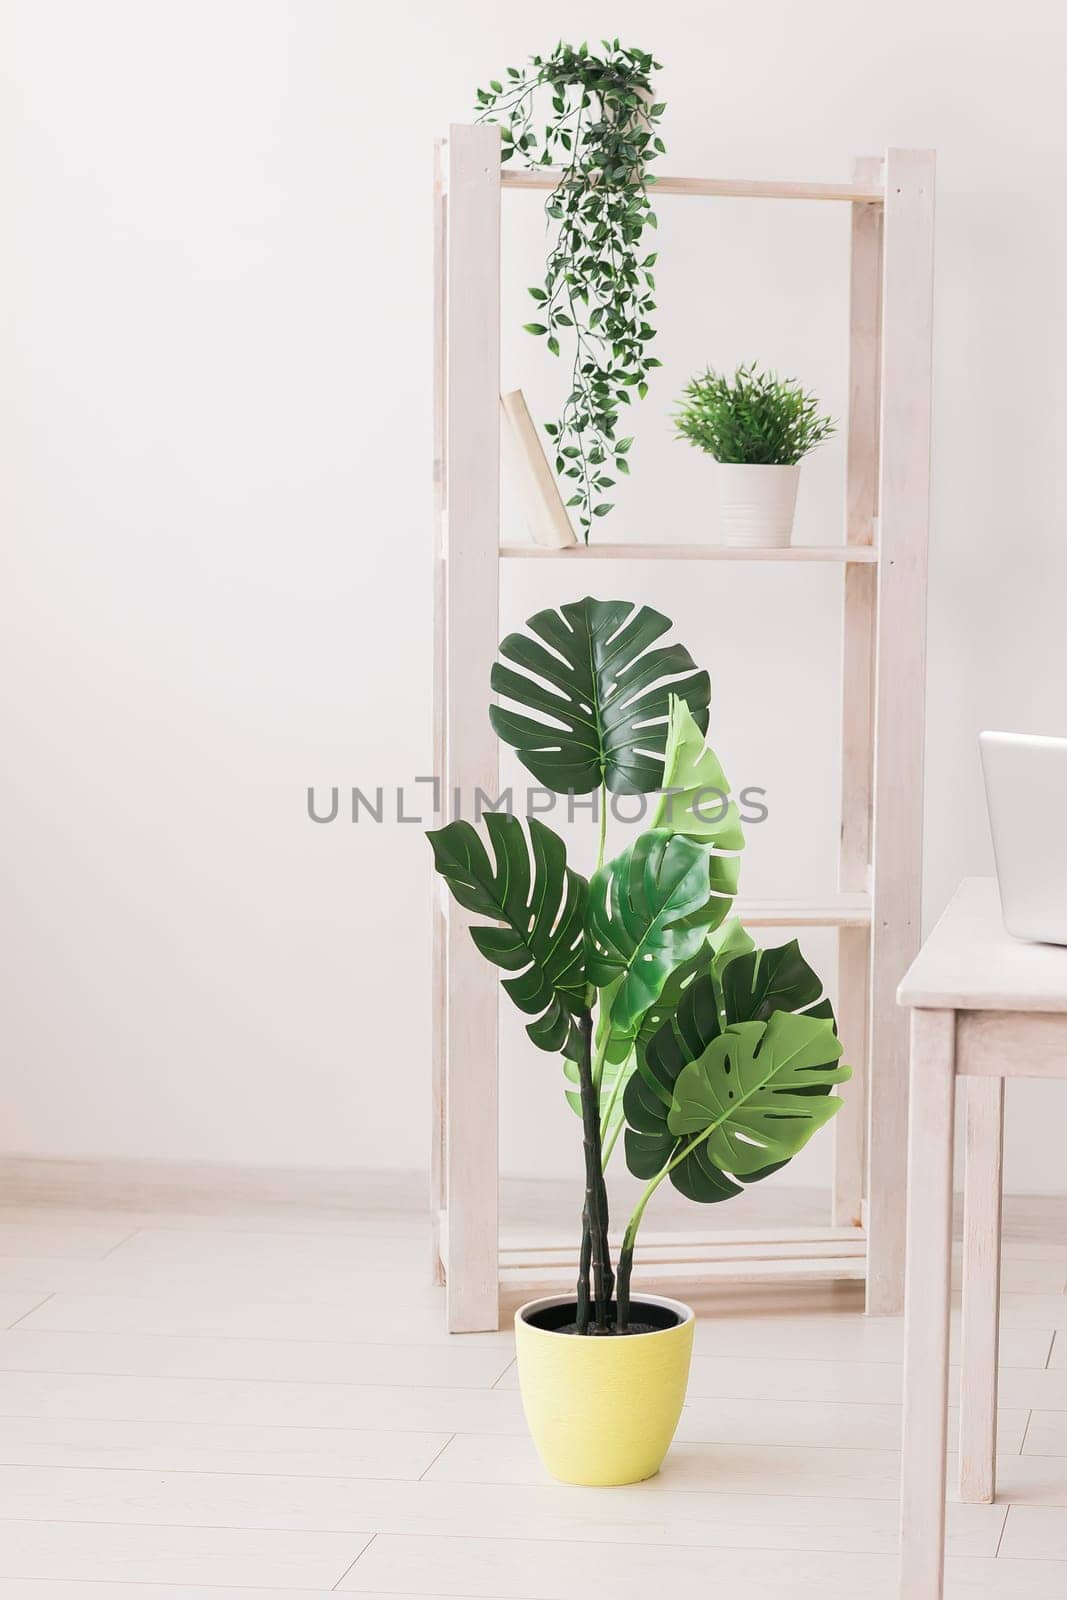 Collection of various artificial home plants. Home greenery interior design with plants concept by Satura86